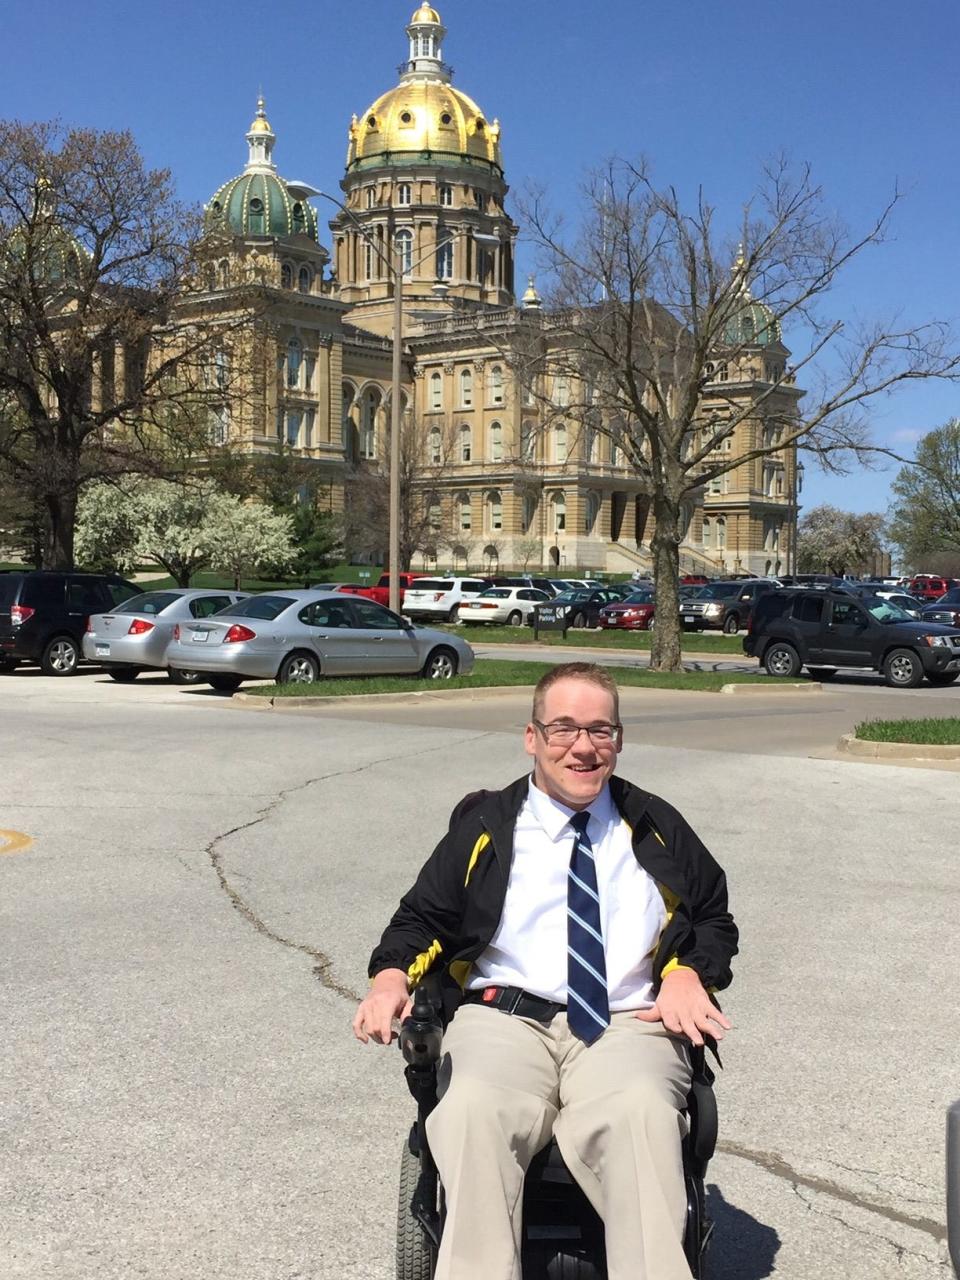 Robert Fisher, 42, is a member of the Iowa Developmental Disability Council. Among other projects, Fisher has worked with the city of Adel to make sidewalks more accessible for people with physical disabilities.